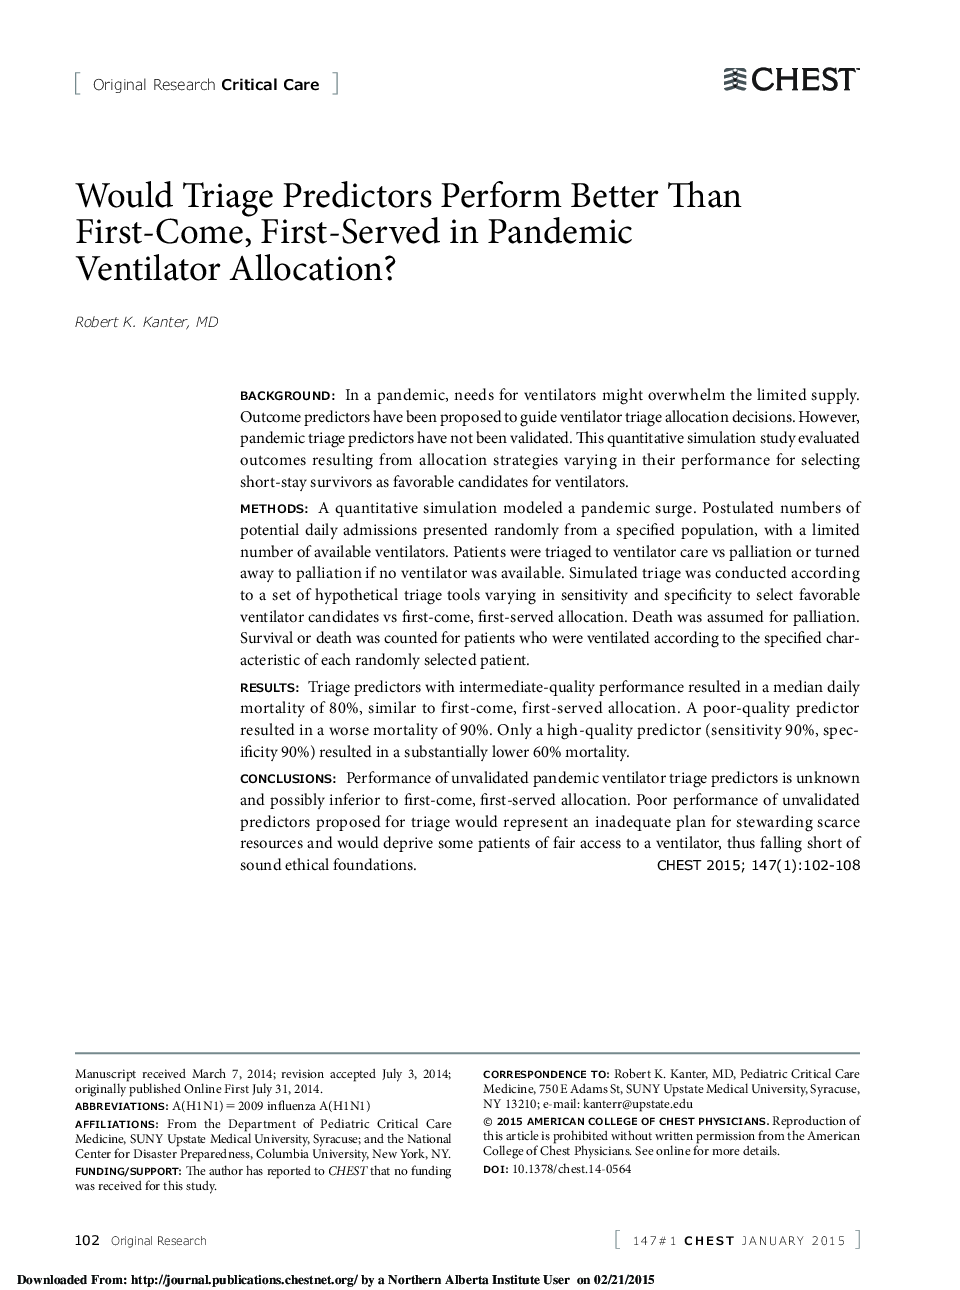 Would Triage Predictors Perform Better Than First-Come, First-Served in Pandemic Ventilator Allocation?